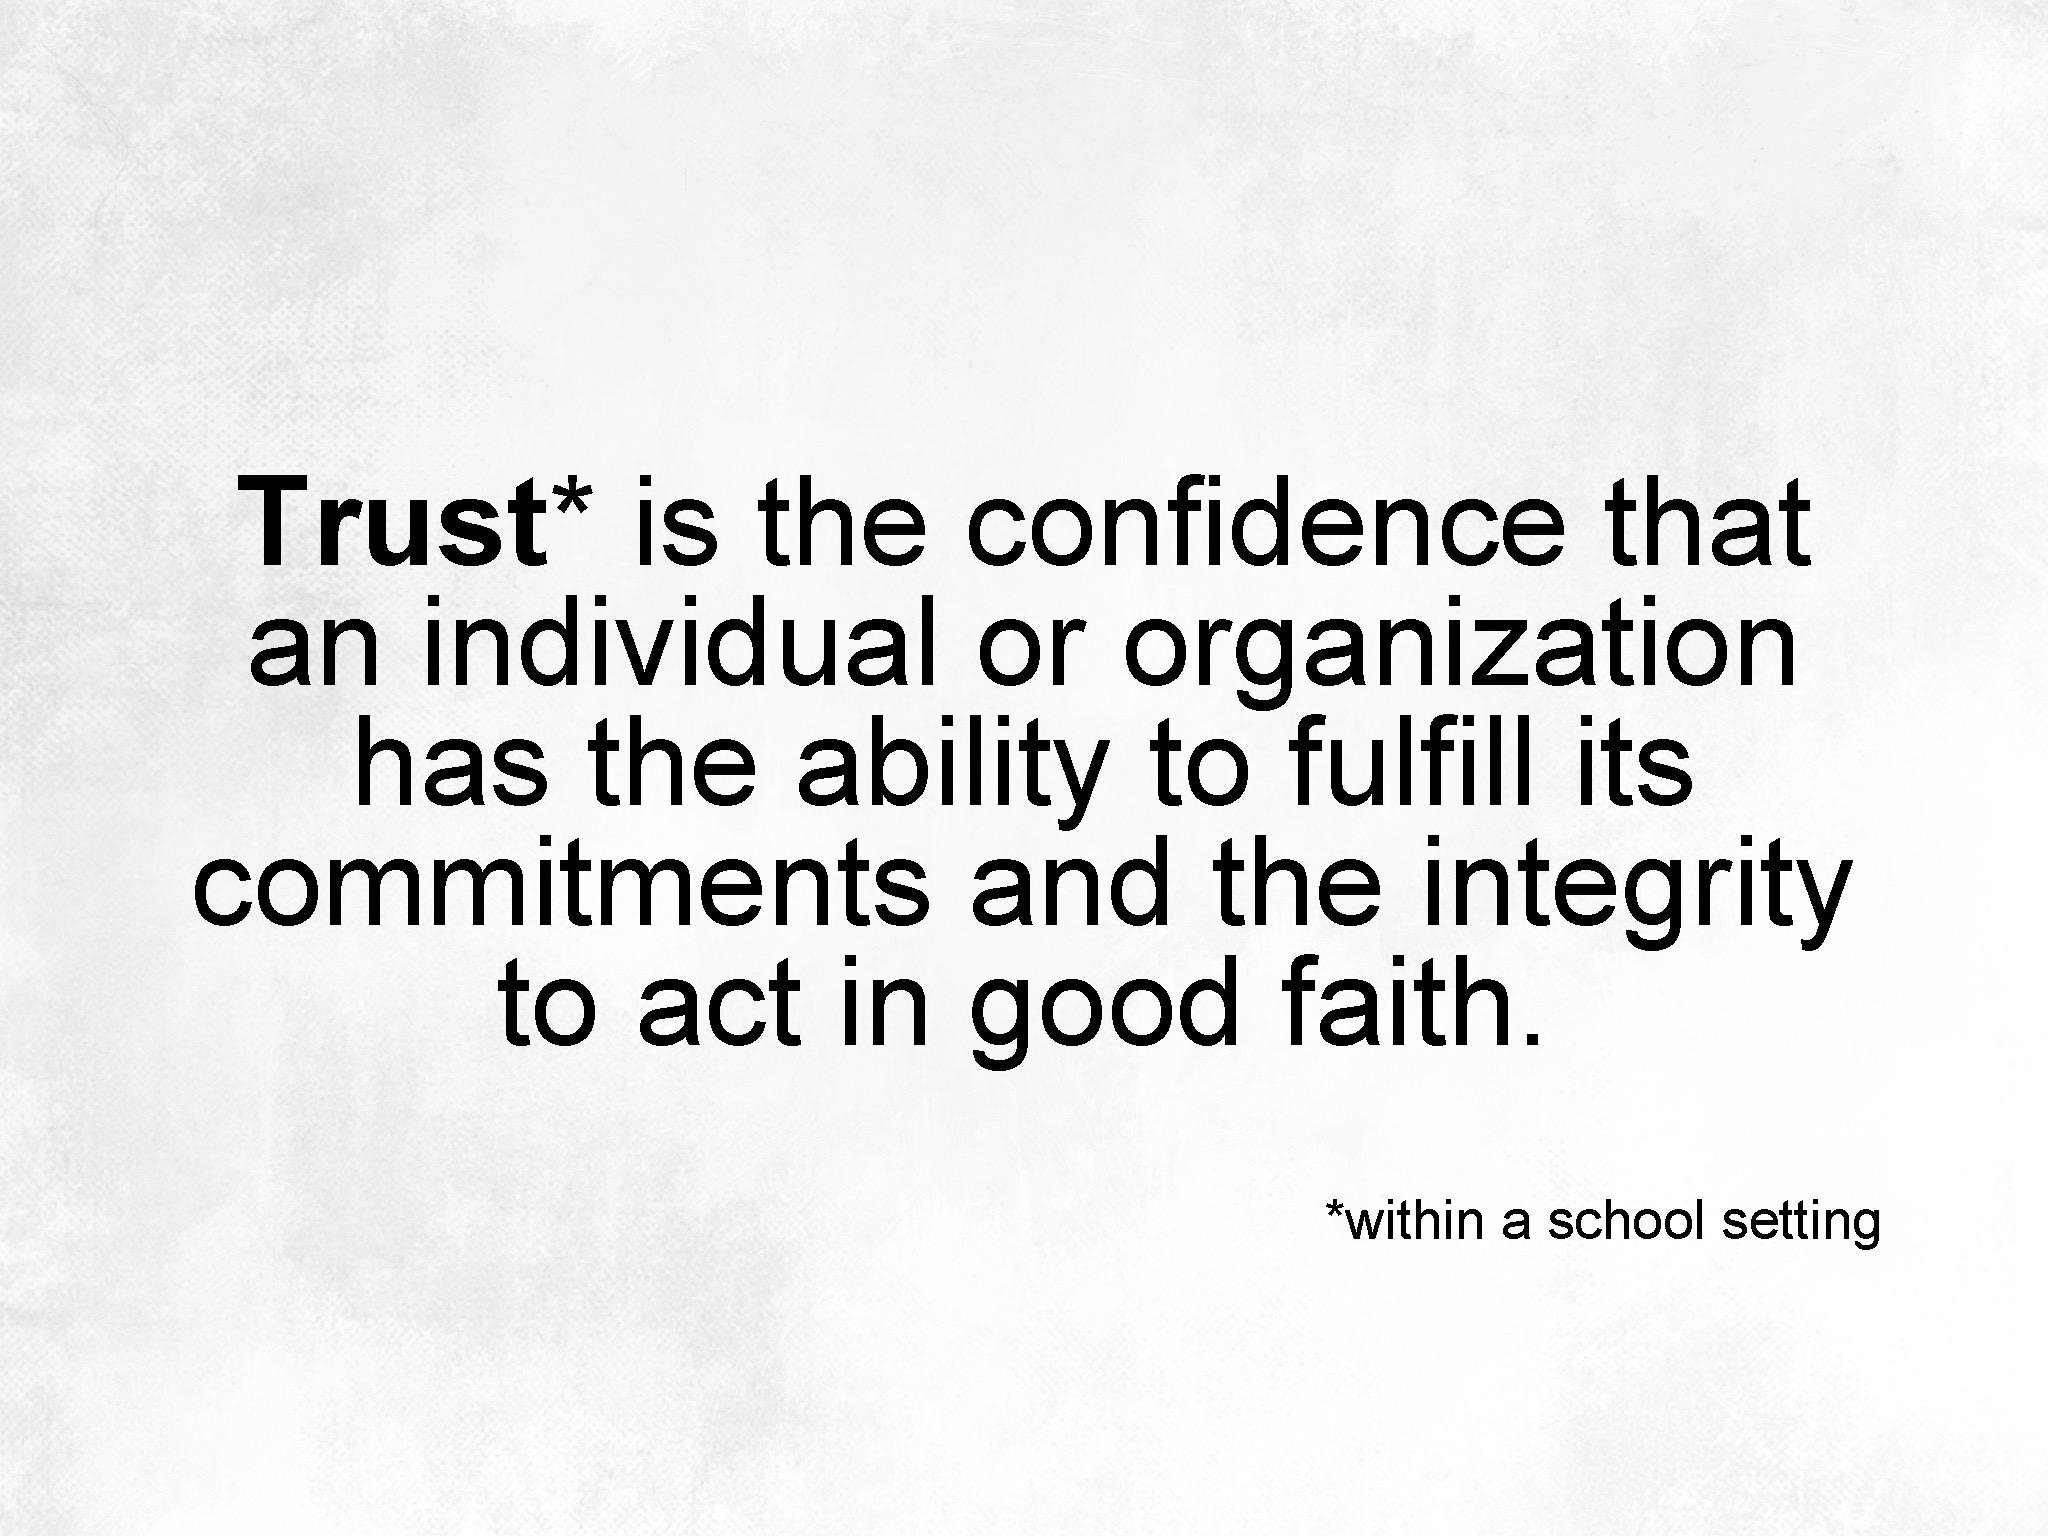 Trust* is the confidence that an individual or organization has the ability to fulfill